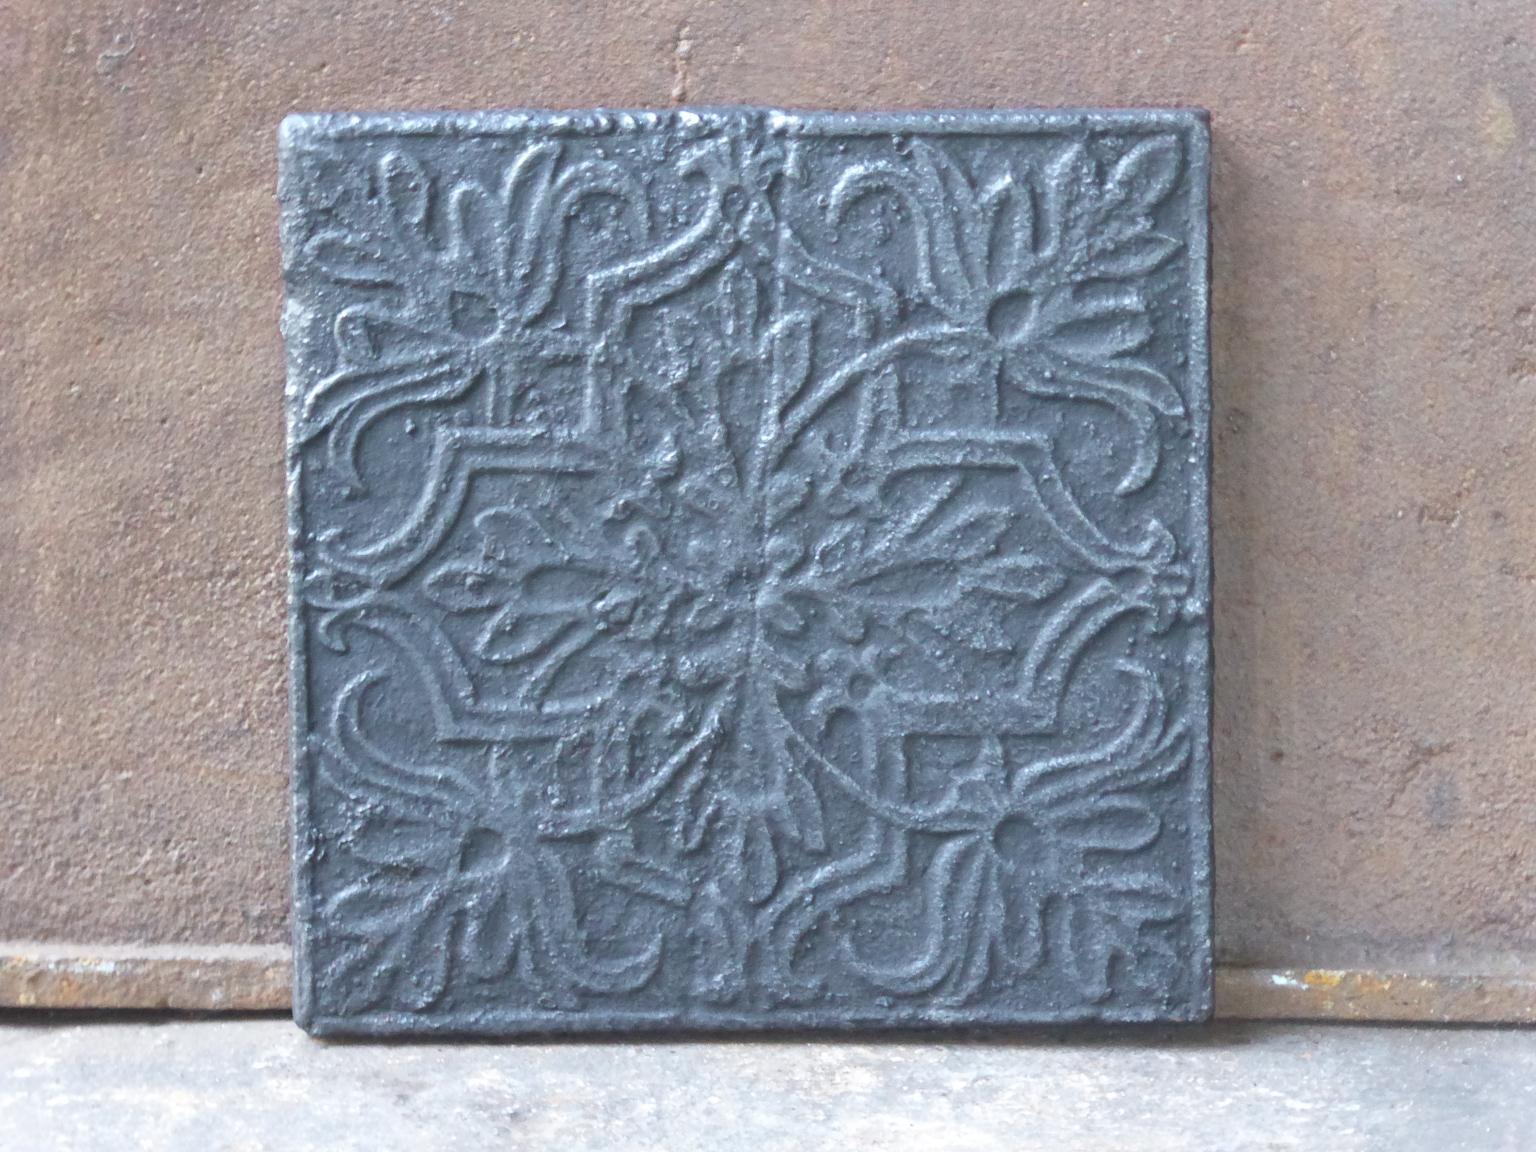 Late 19th-early 20th century French Art Nouveau fireback. The fireback is made of cast iron. The patina is black.